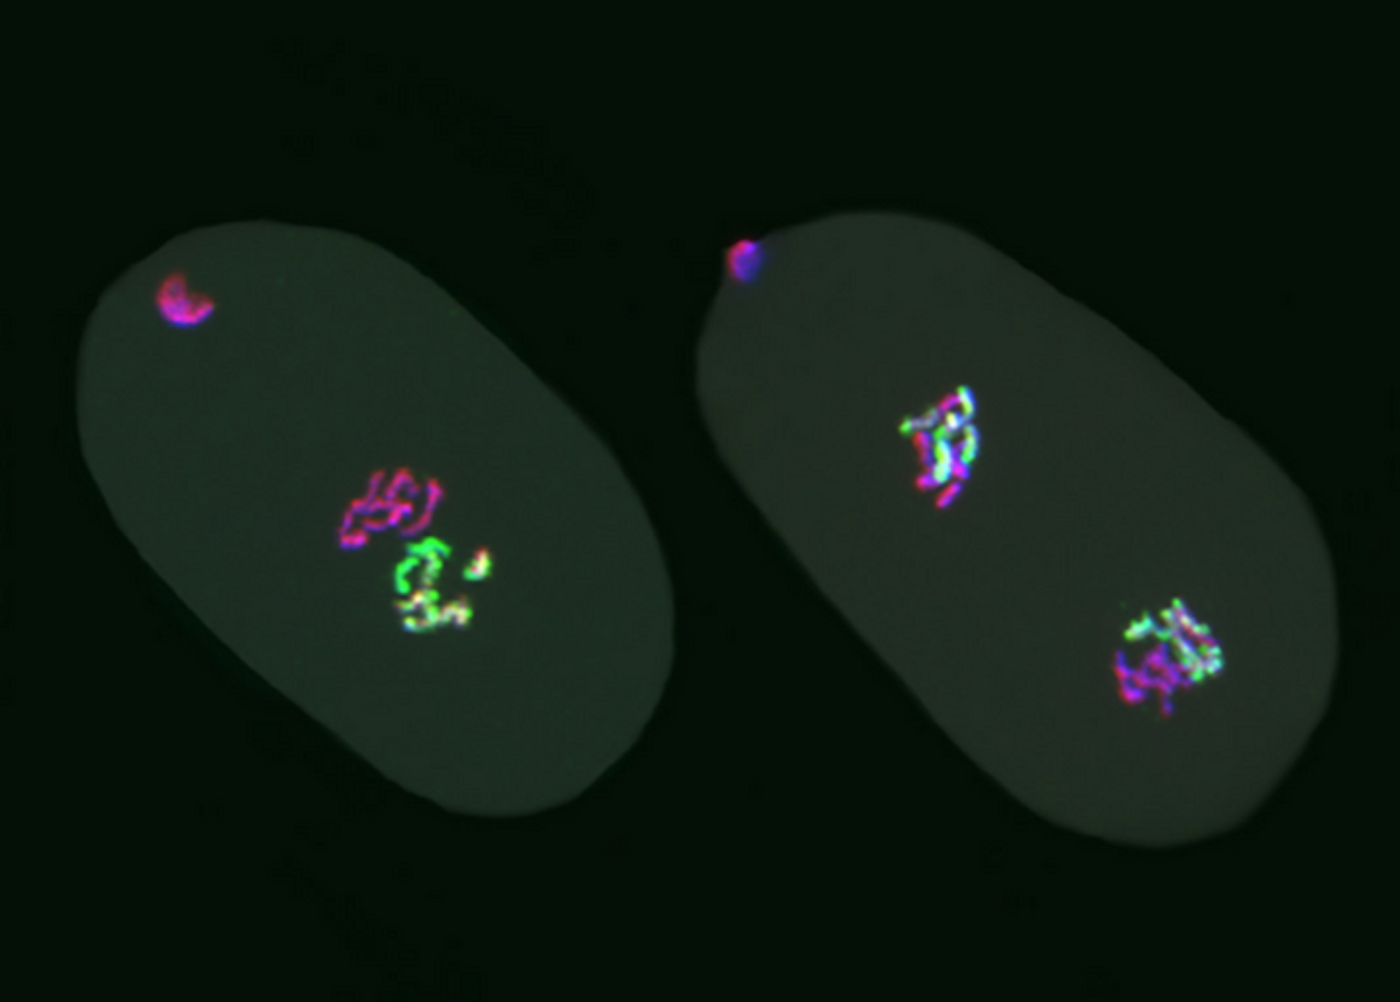 A one-cell C. elegans embryo (left) inherited chromosomes from the egg (pink) and chromosomes from the sperm (green), with colors illustrating the presence or absence of H3K27me3. A two-cell embryo (right) shows egg and sperm chromosomes united in each nucleus. / Credit: Photo by Laura Gaydos